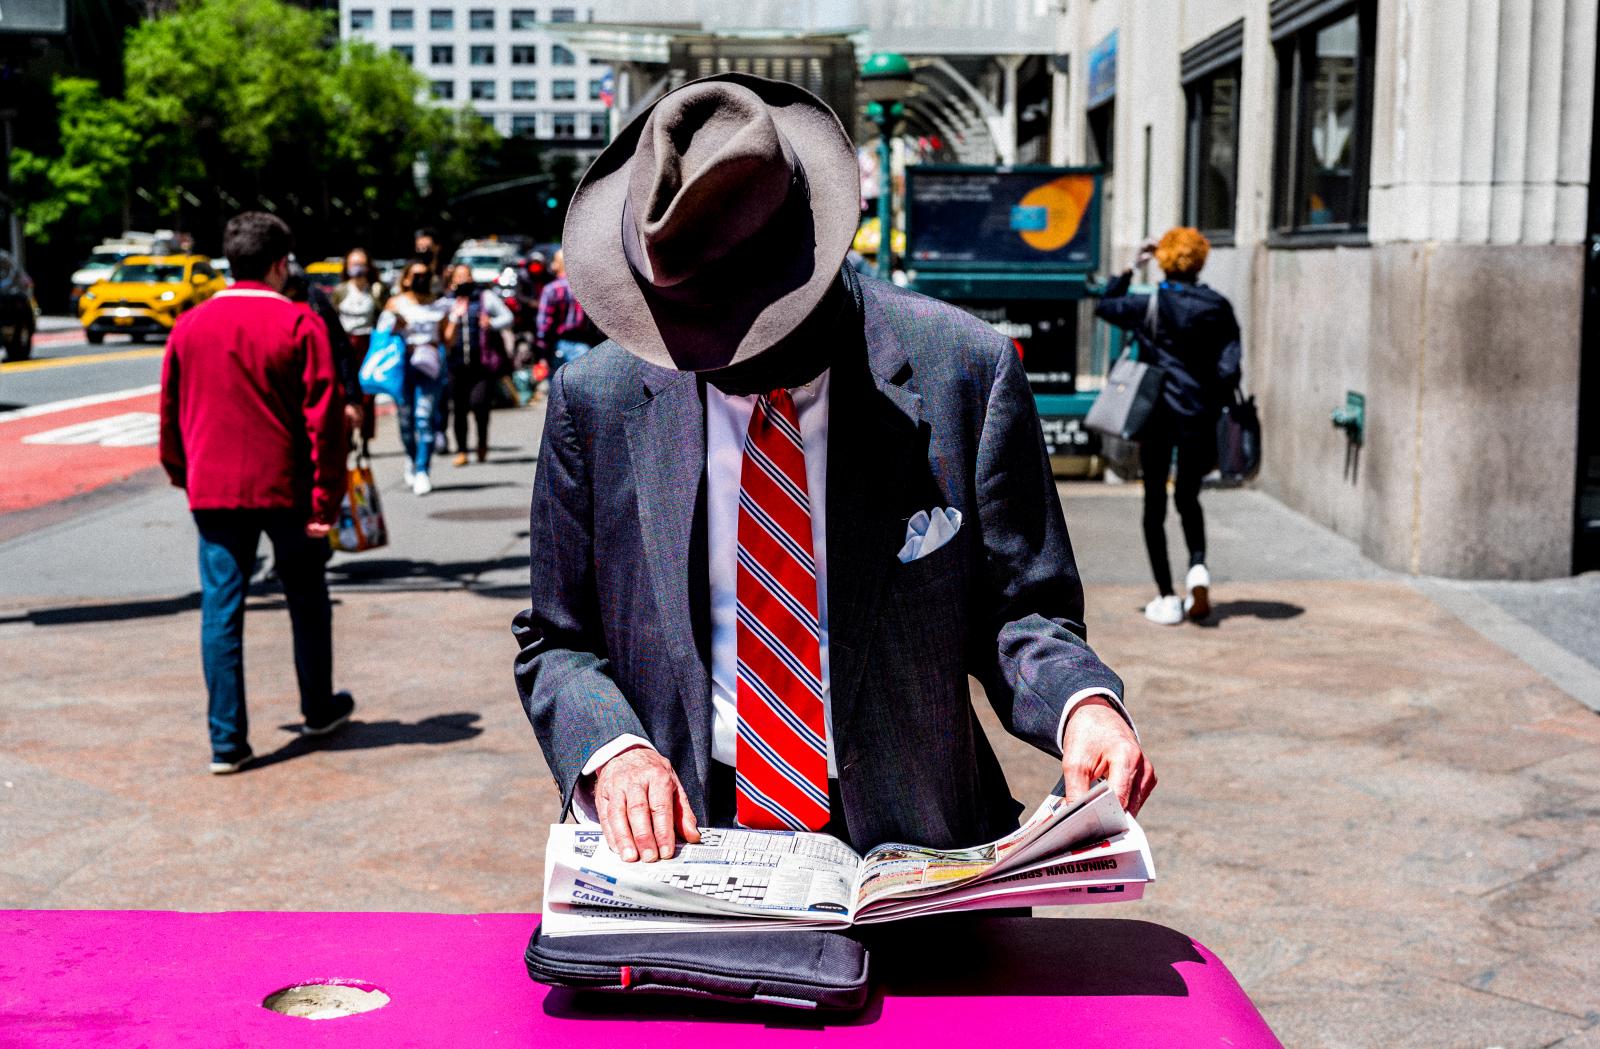 Image from Street Photography/Color Works -  Old-school reading a Newspaper  34th Street/Midtown,...